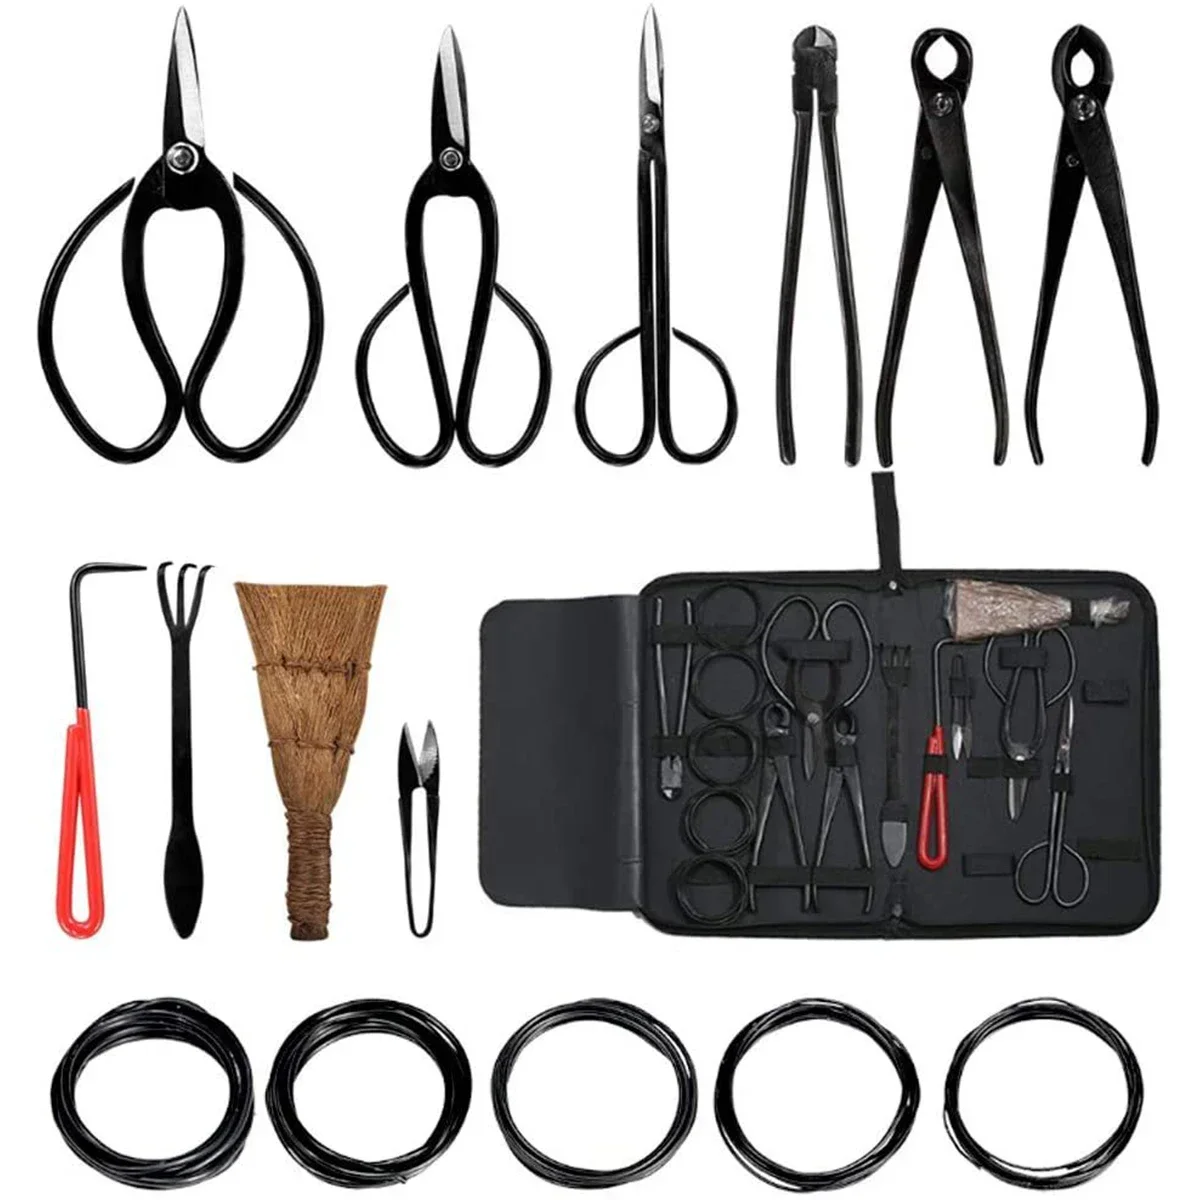 

Bonsai Carbon Pruning Case Pruning Cutter Set Tool Tool With Hand Steel 1/15pcs Kit Nylon Garden Home For Scissors Extensive